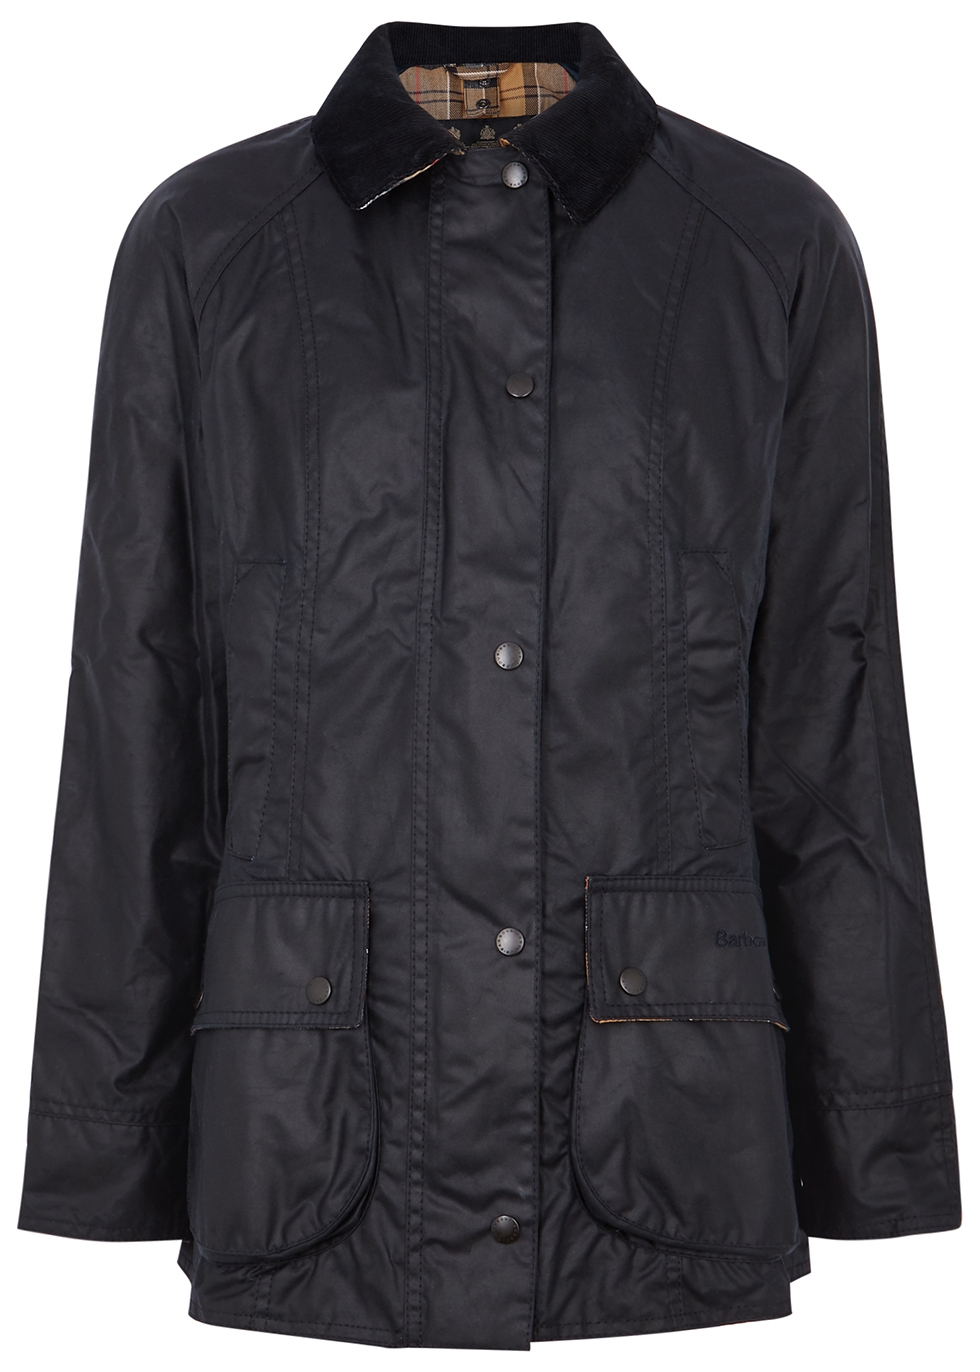 Barbour Beadnell navy waxed cotton jacket - Harvey Nichols